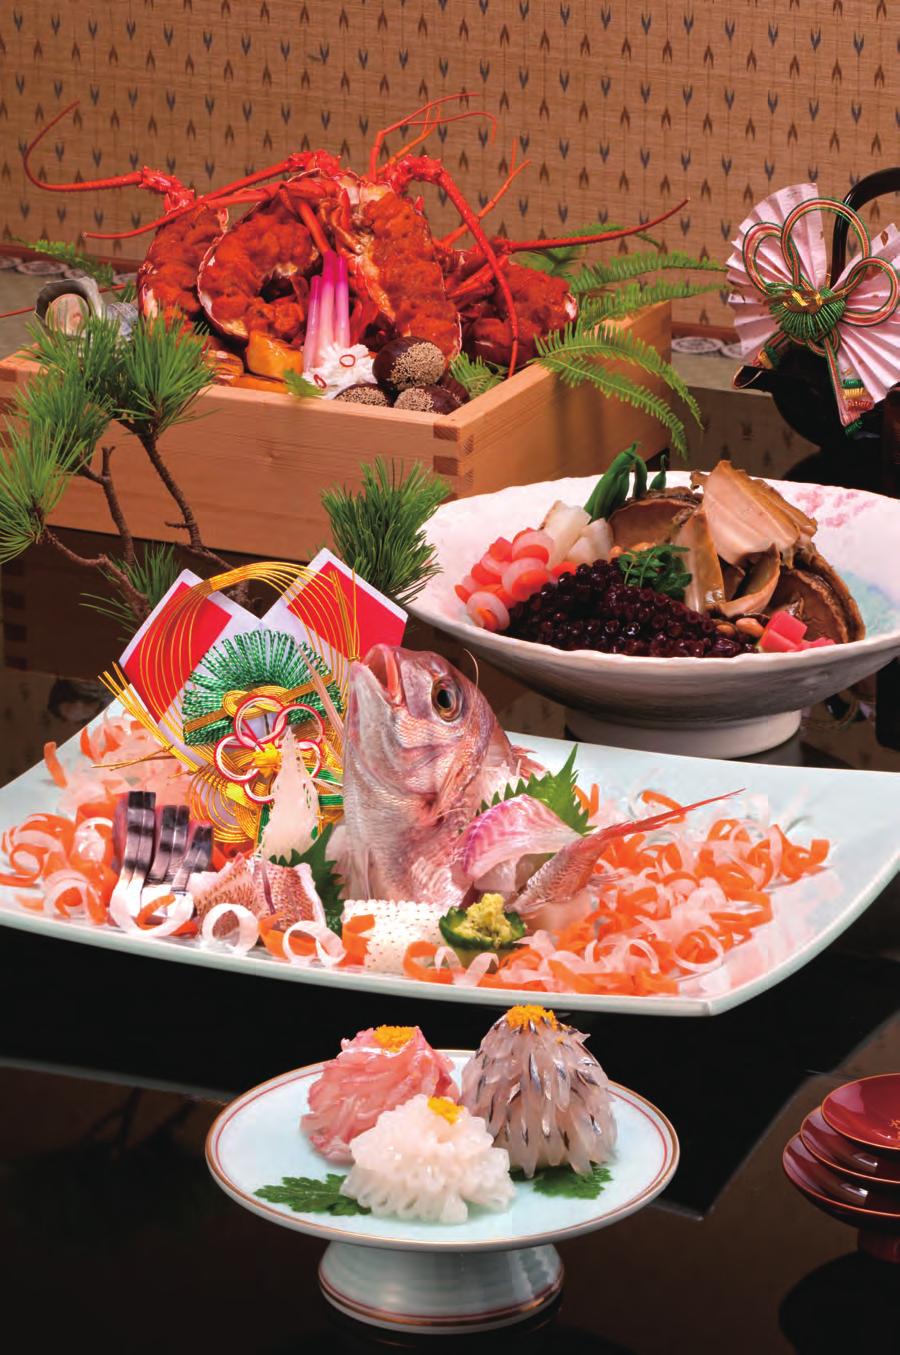 Town blessed with sea harvests Iwaizakana(celebration ﬁsh) of Japan Japanese regard "Ise-ebi (lobster)," sea bream, and